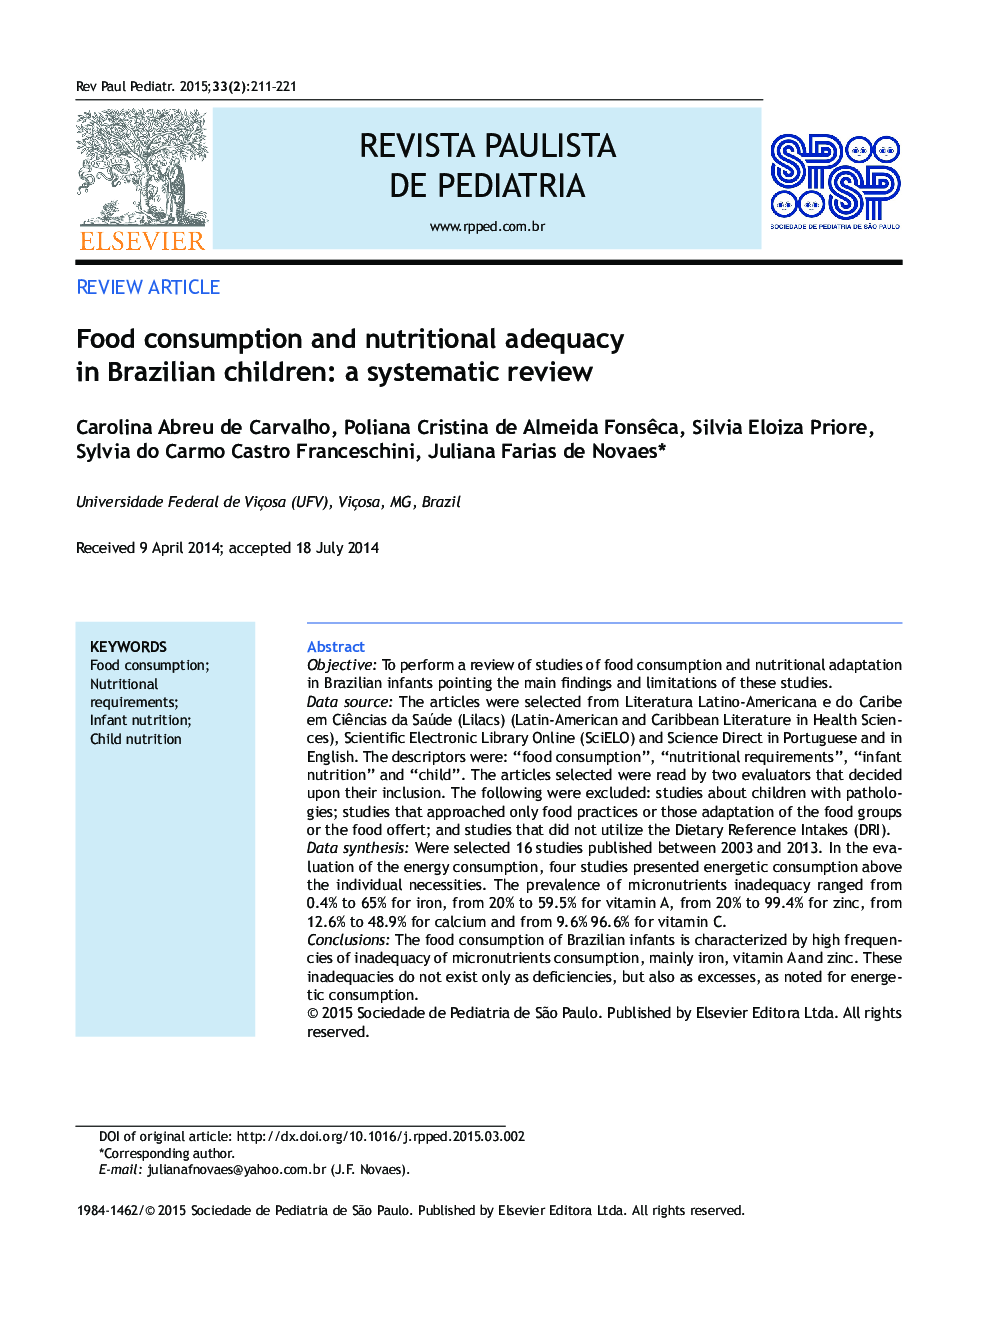 Food consumption and nutritional adequacy in Brazilian children: a systematic review